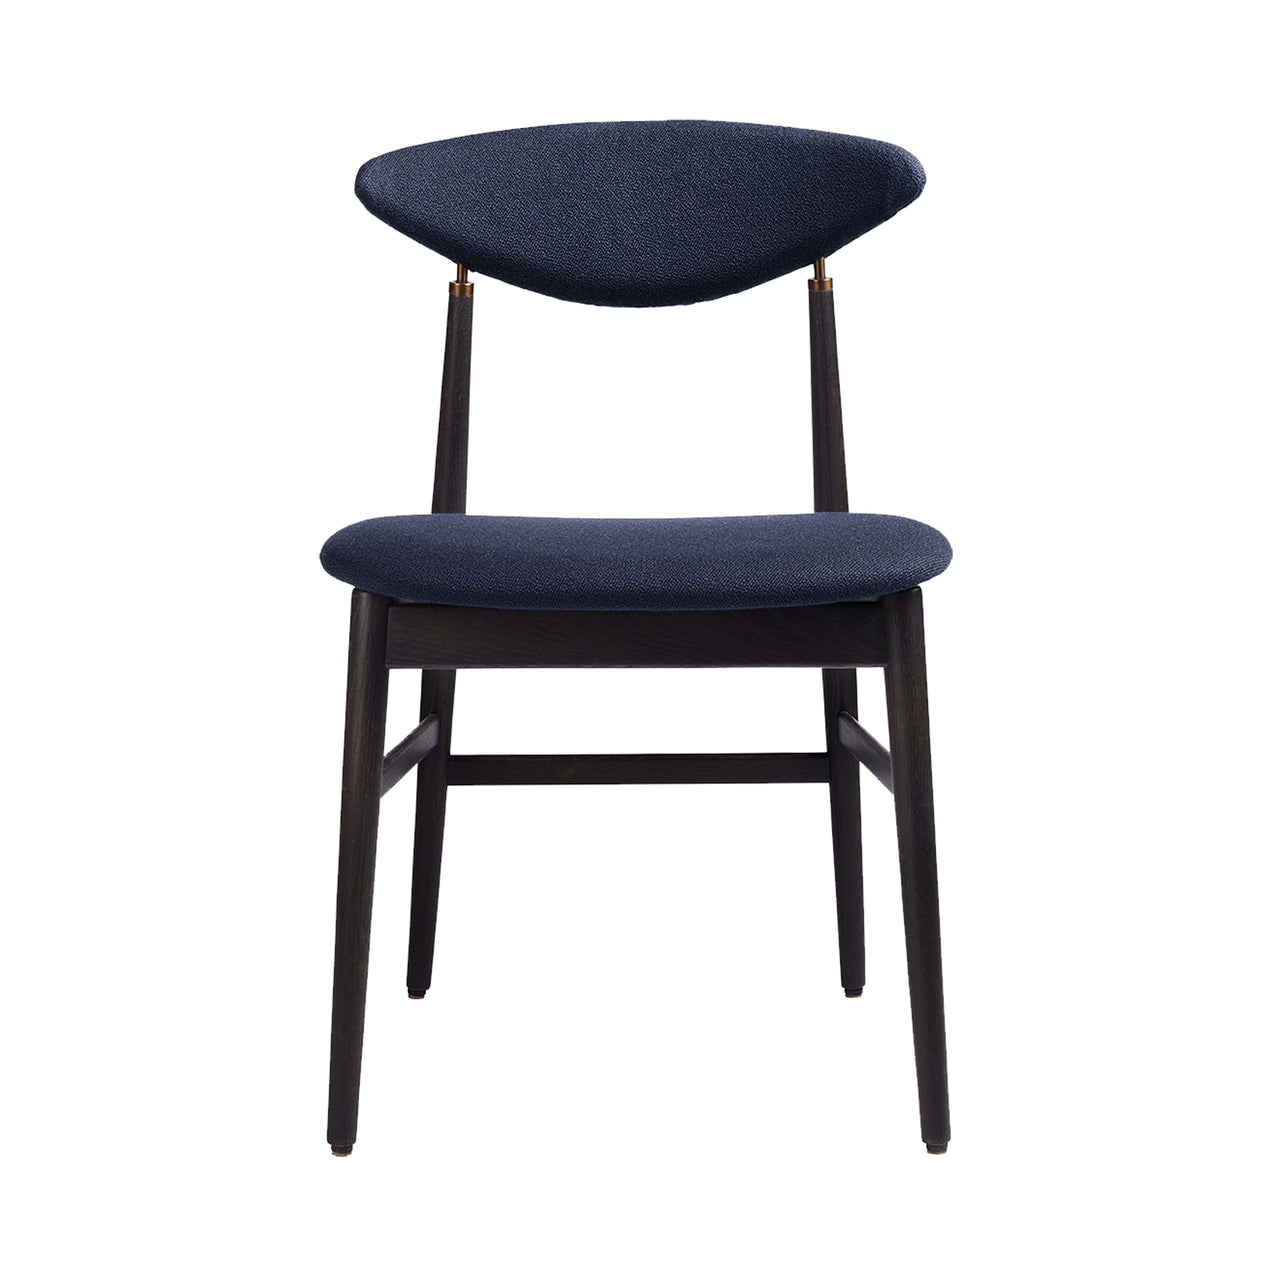 Gent Dining Chair: Wood Base + Fully Upholstered + Black Stained Ash